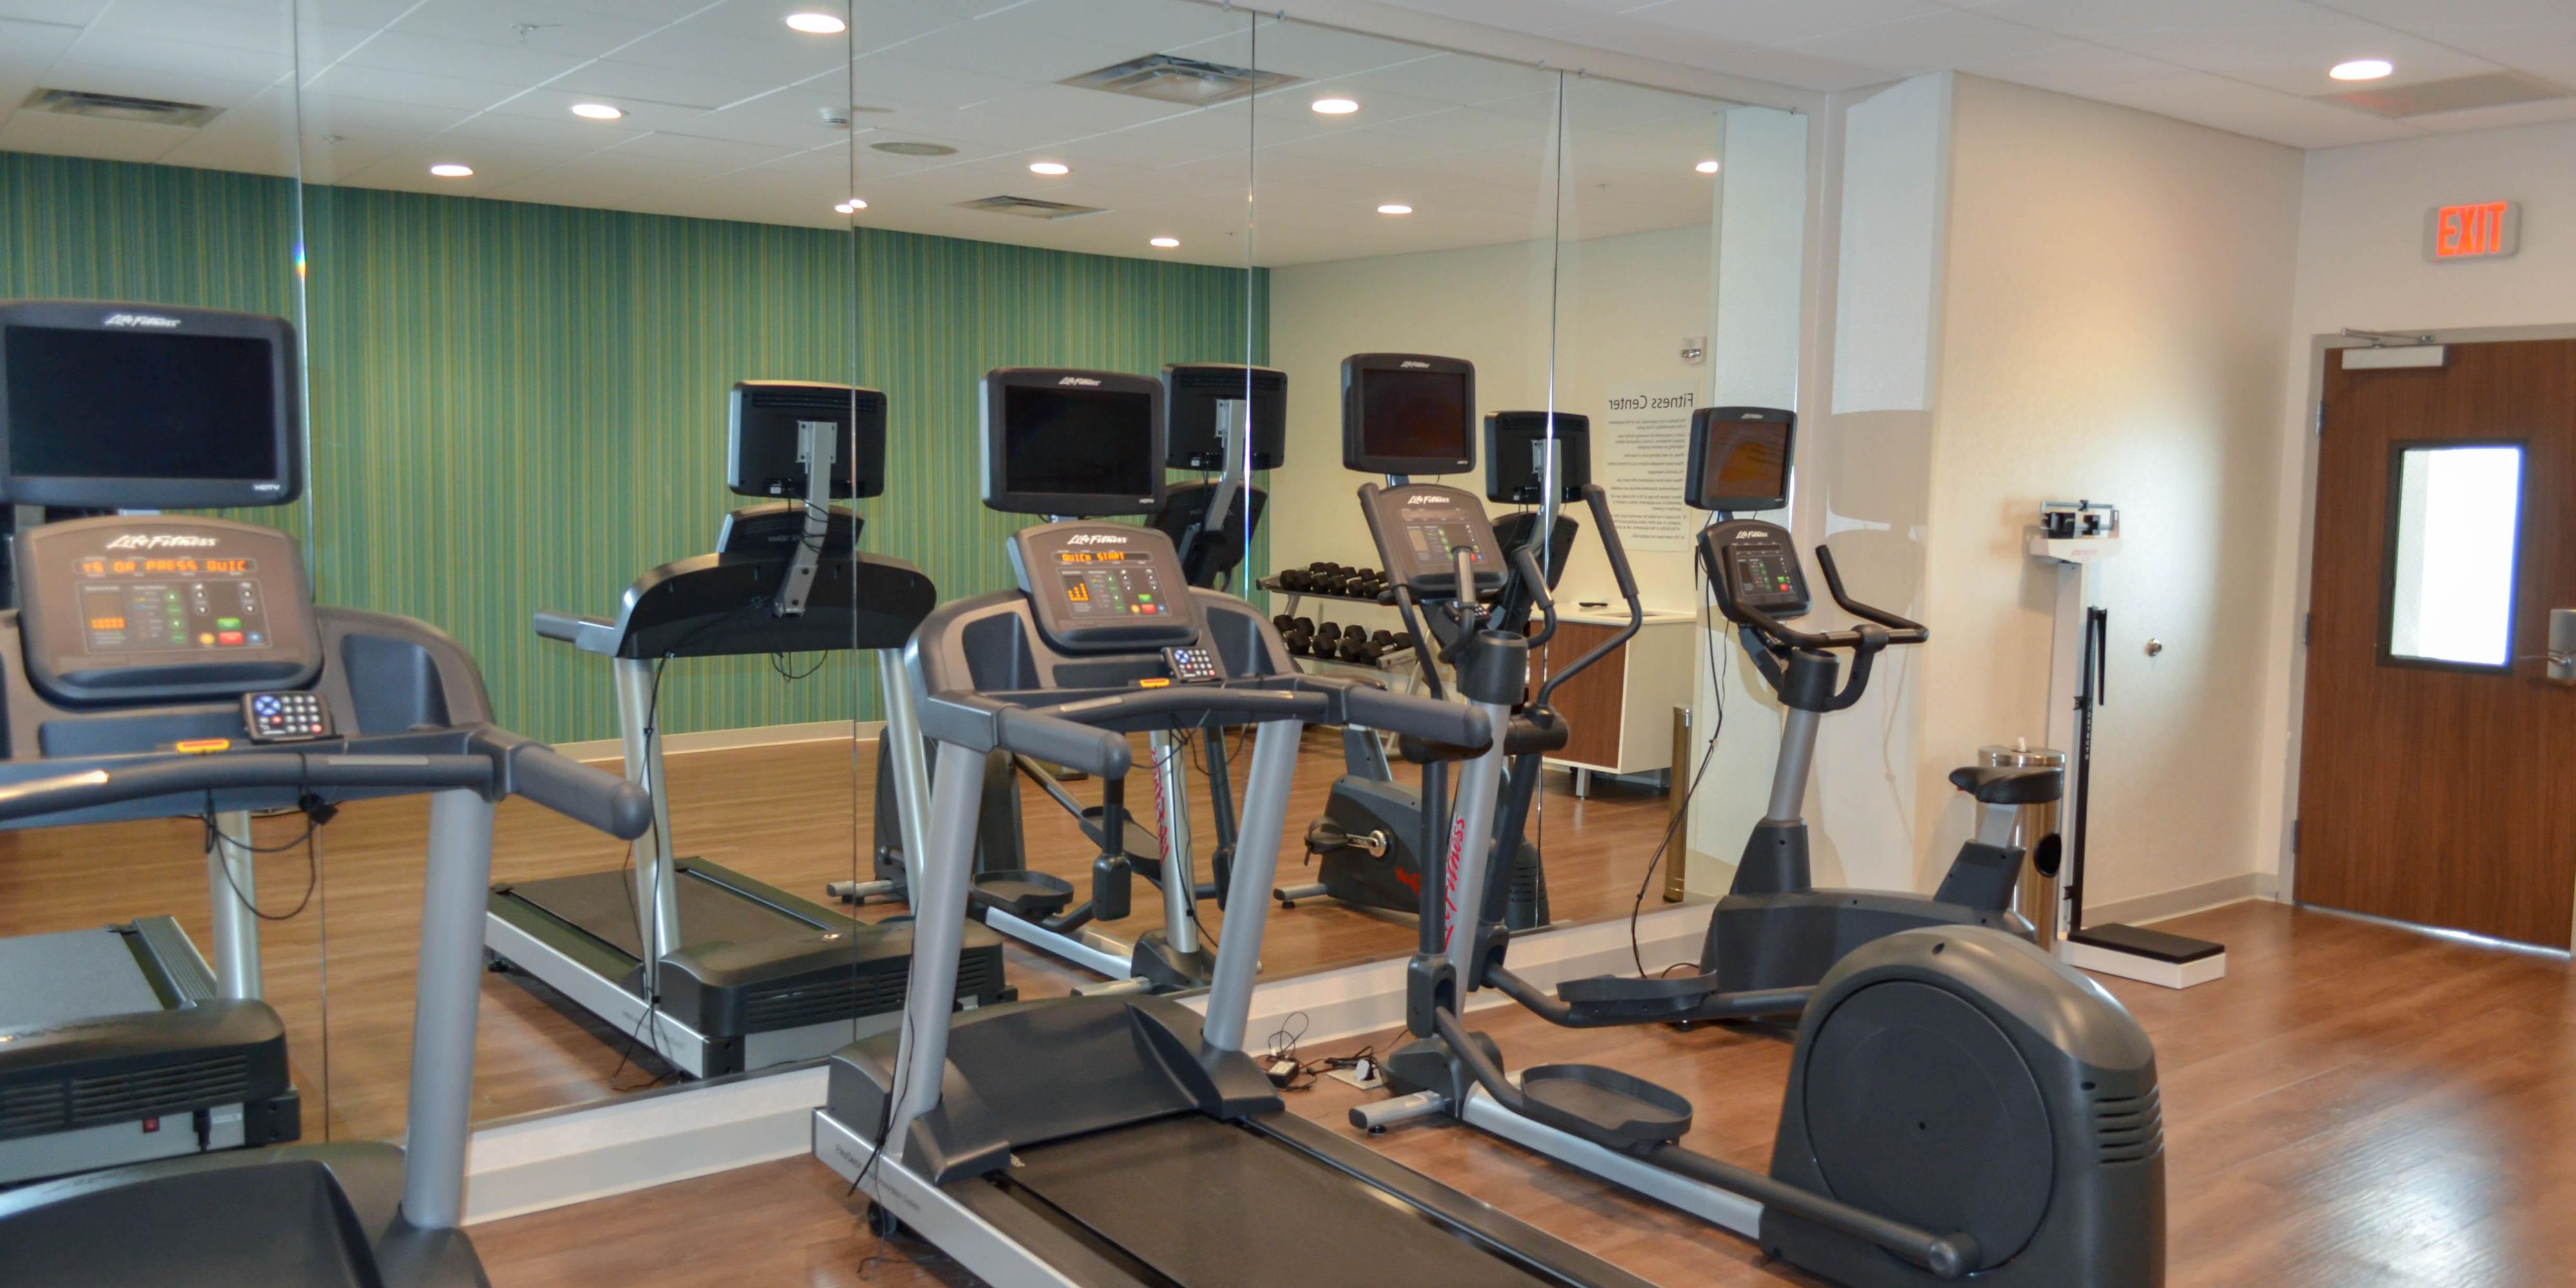 We know your schedule is not always your own. 24-hour access lets you be you and work when your schedule allows. Our new fitness center provides what you need like ellipticals, treadmills, and weights. We got whatever you need.